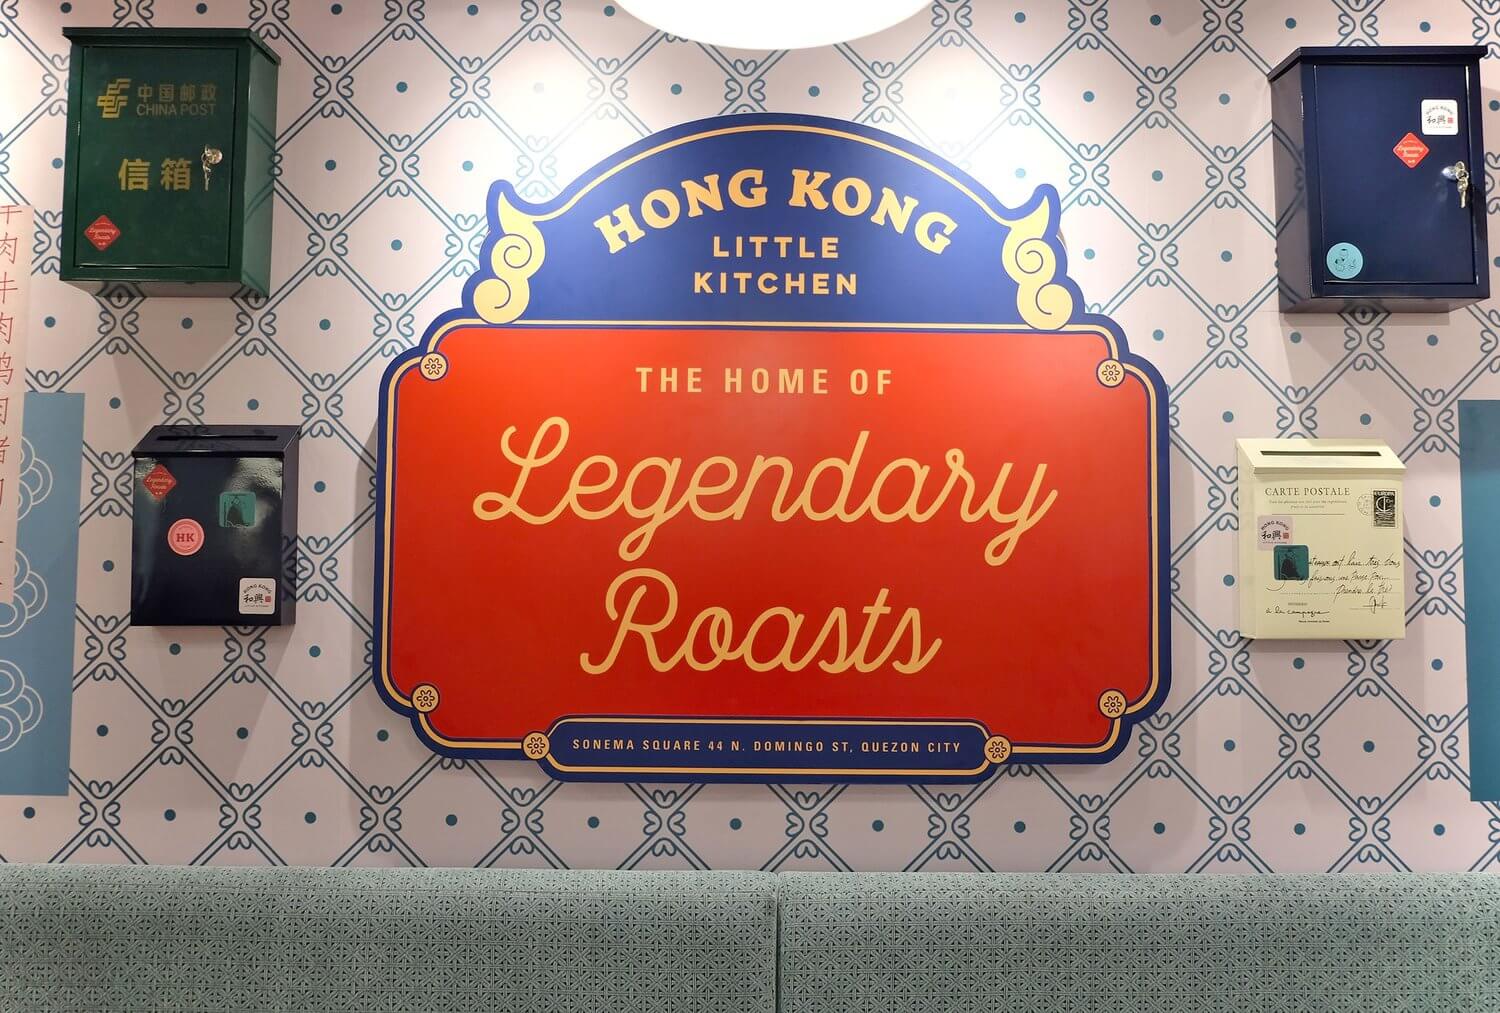 Signage and environment design for food and beverage brand Hong Kong Little Kitchen